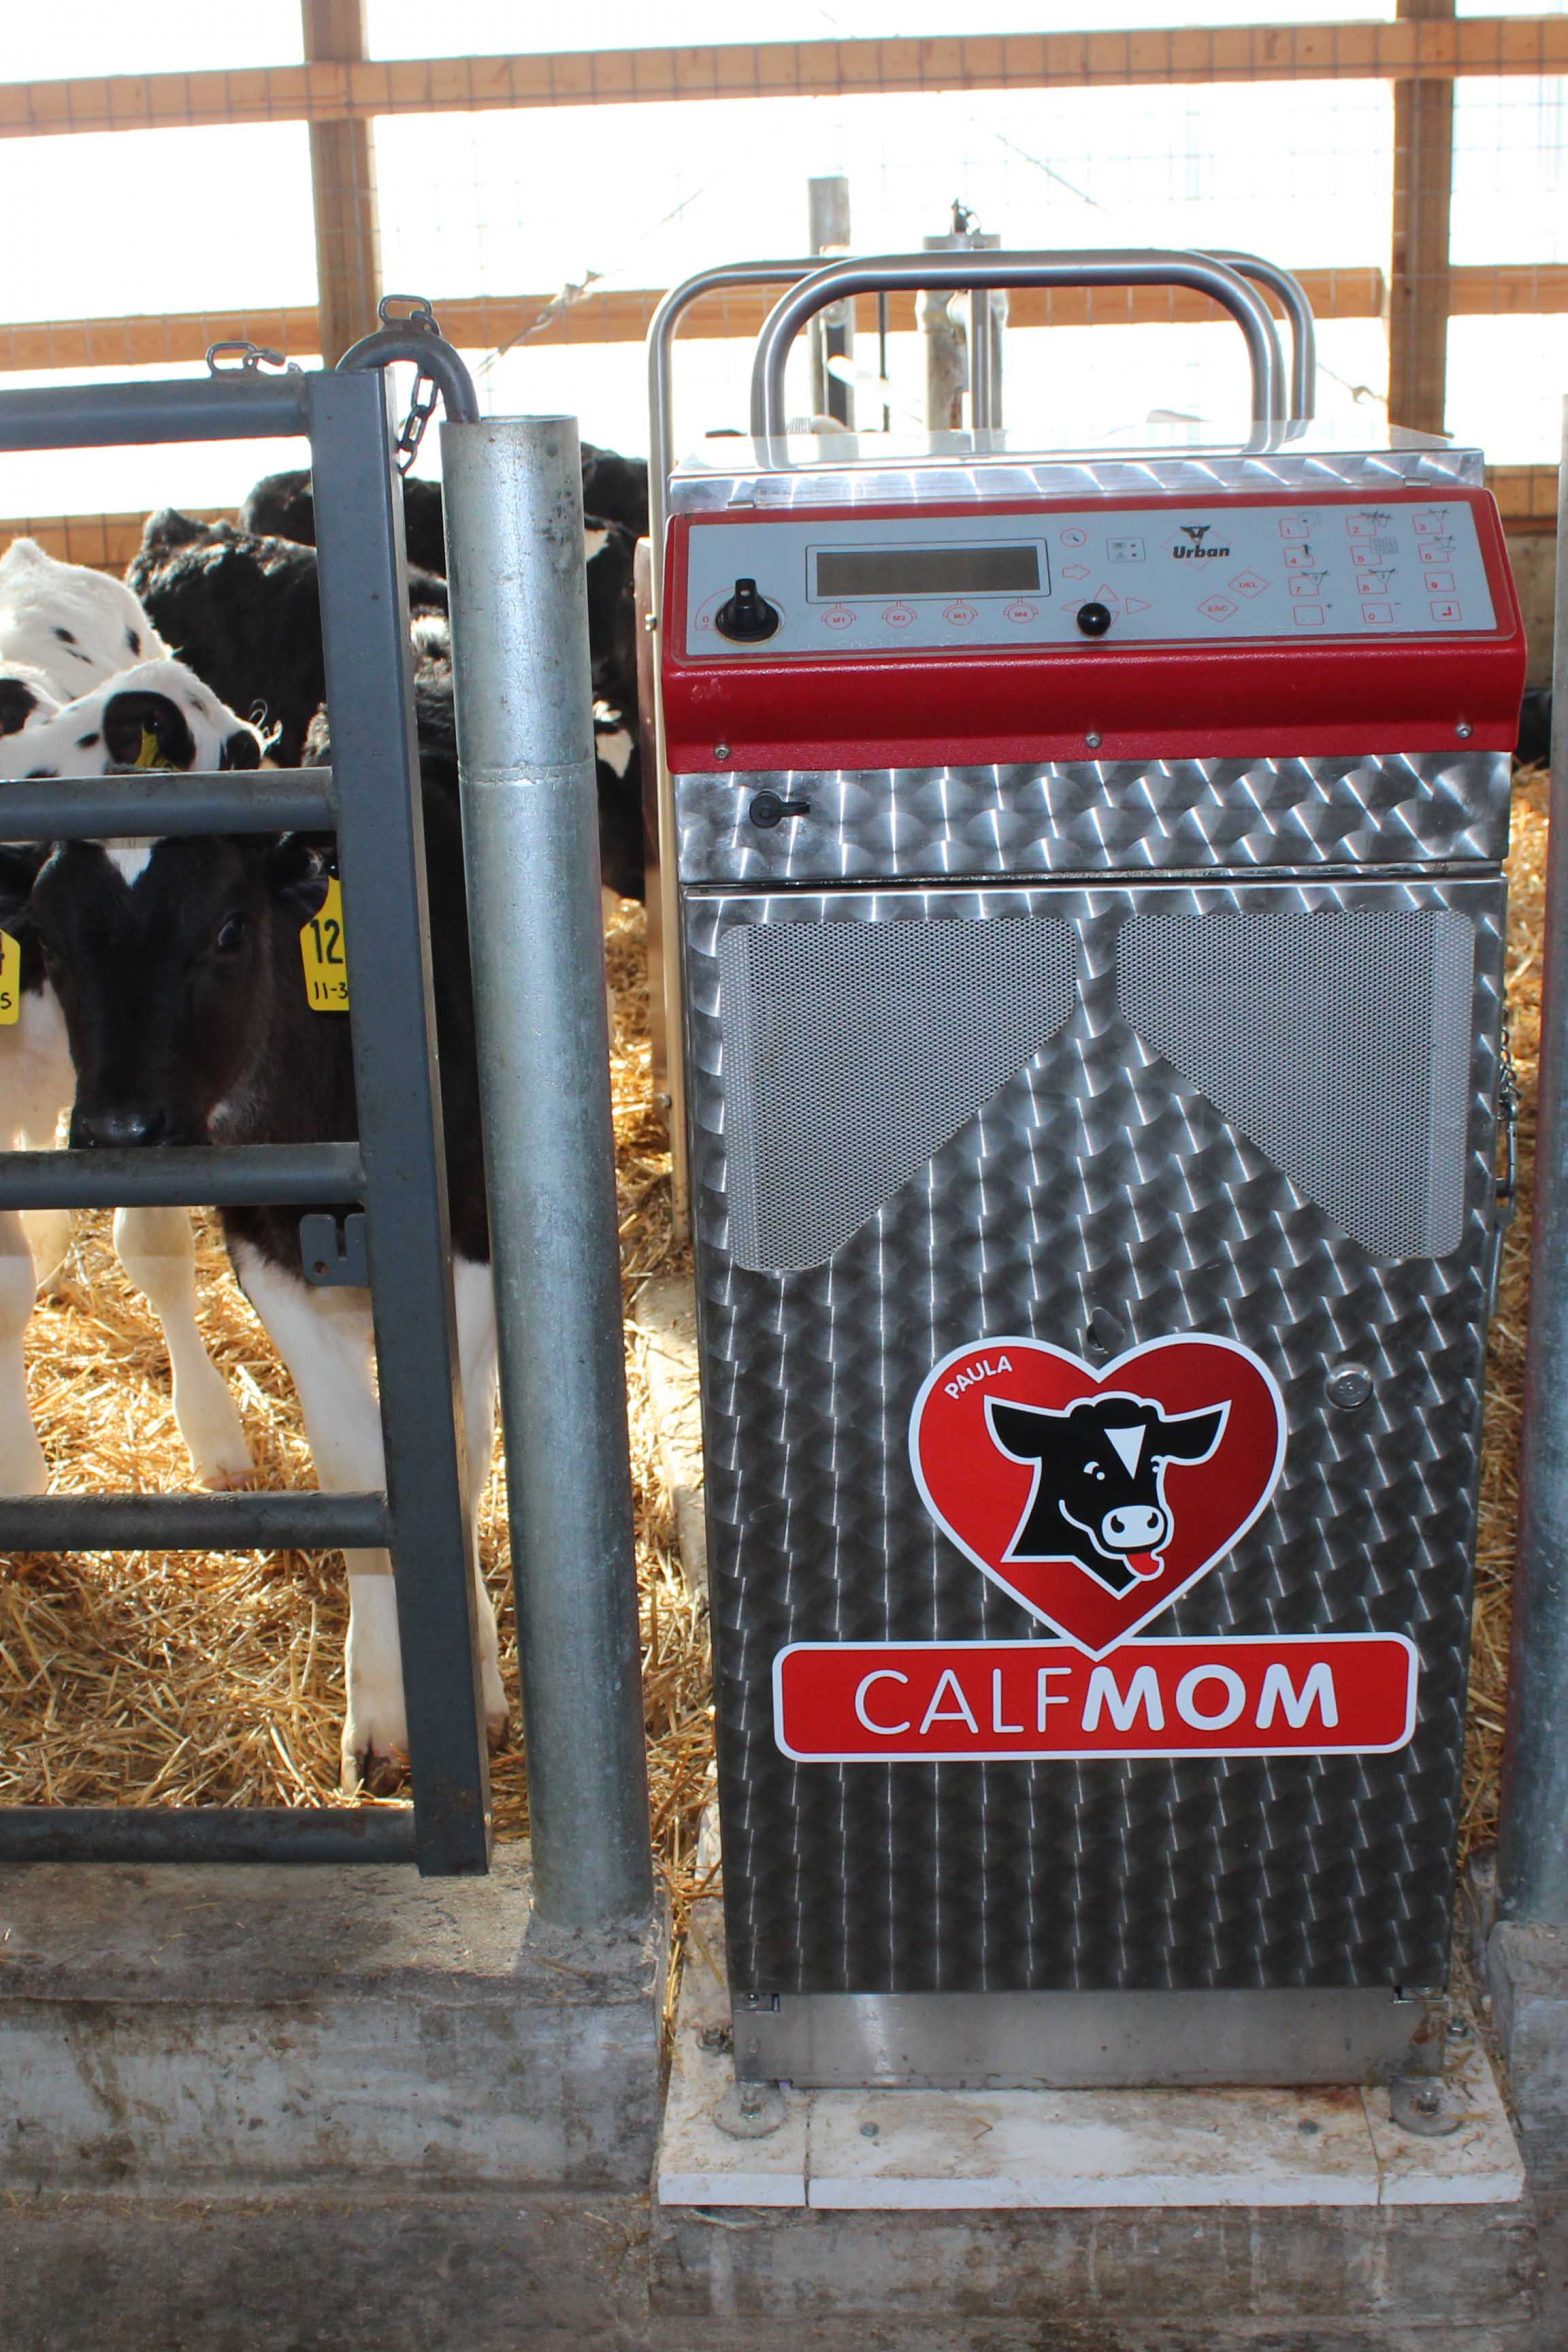 One year ago, Brad and Carla Juedes of Juedes Dairy in Merrill, Wisconsin installed this Urban automatic calf feeder in a new calf barn.  They chose the Urban system for its easy maintenance and sanitation as well as excellent local dealer customer service.